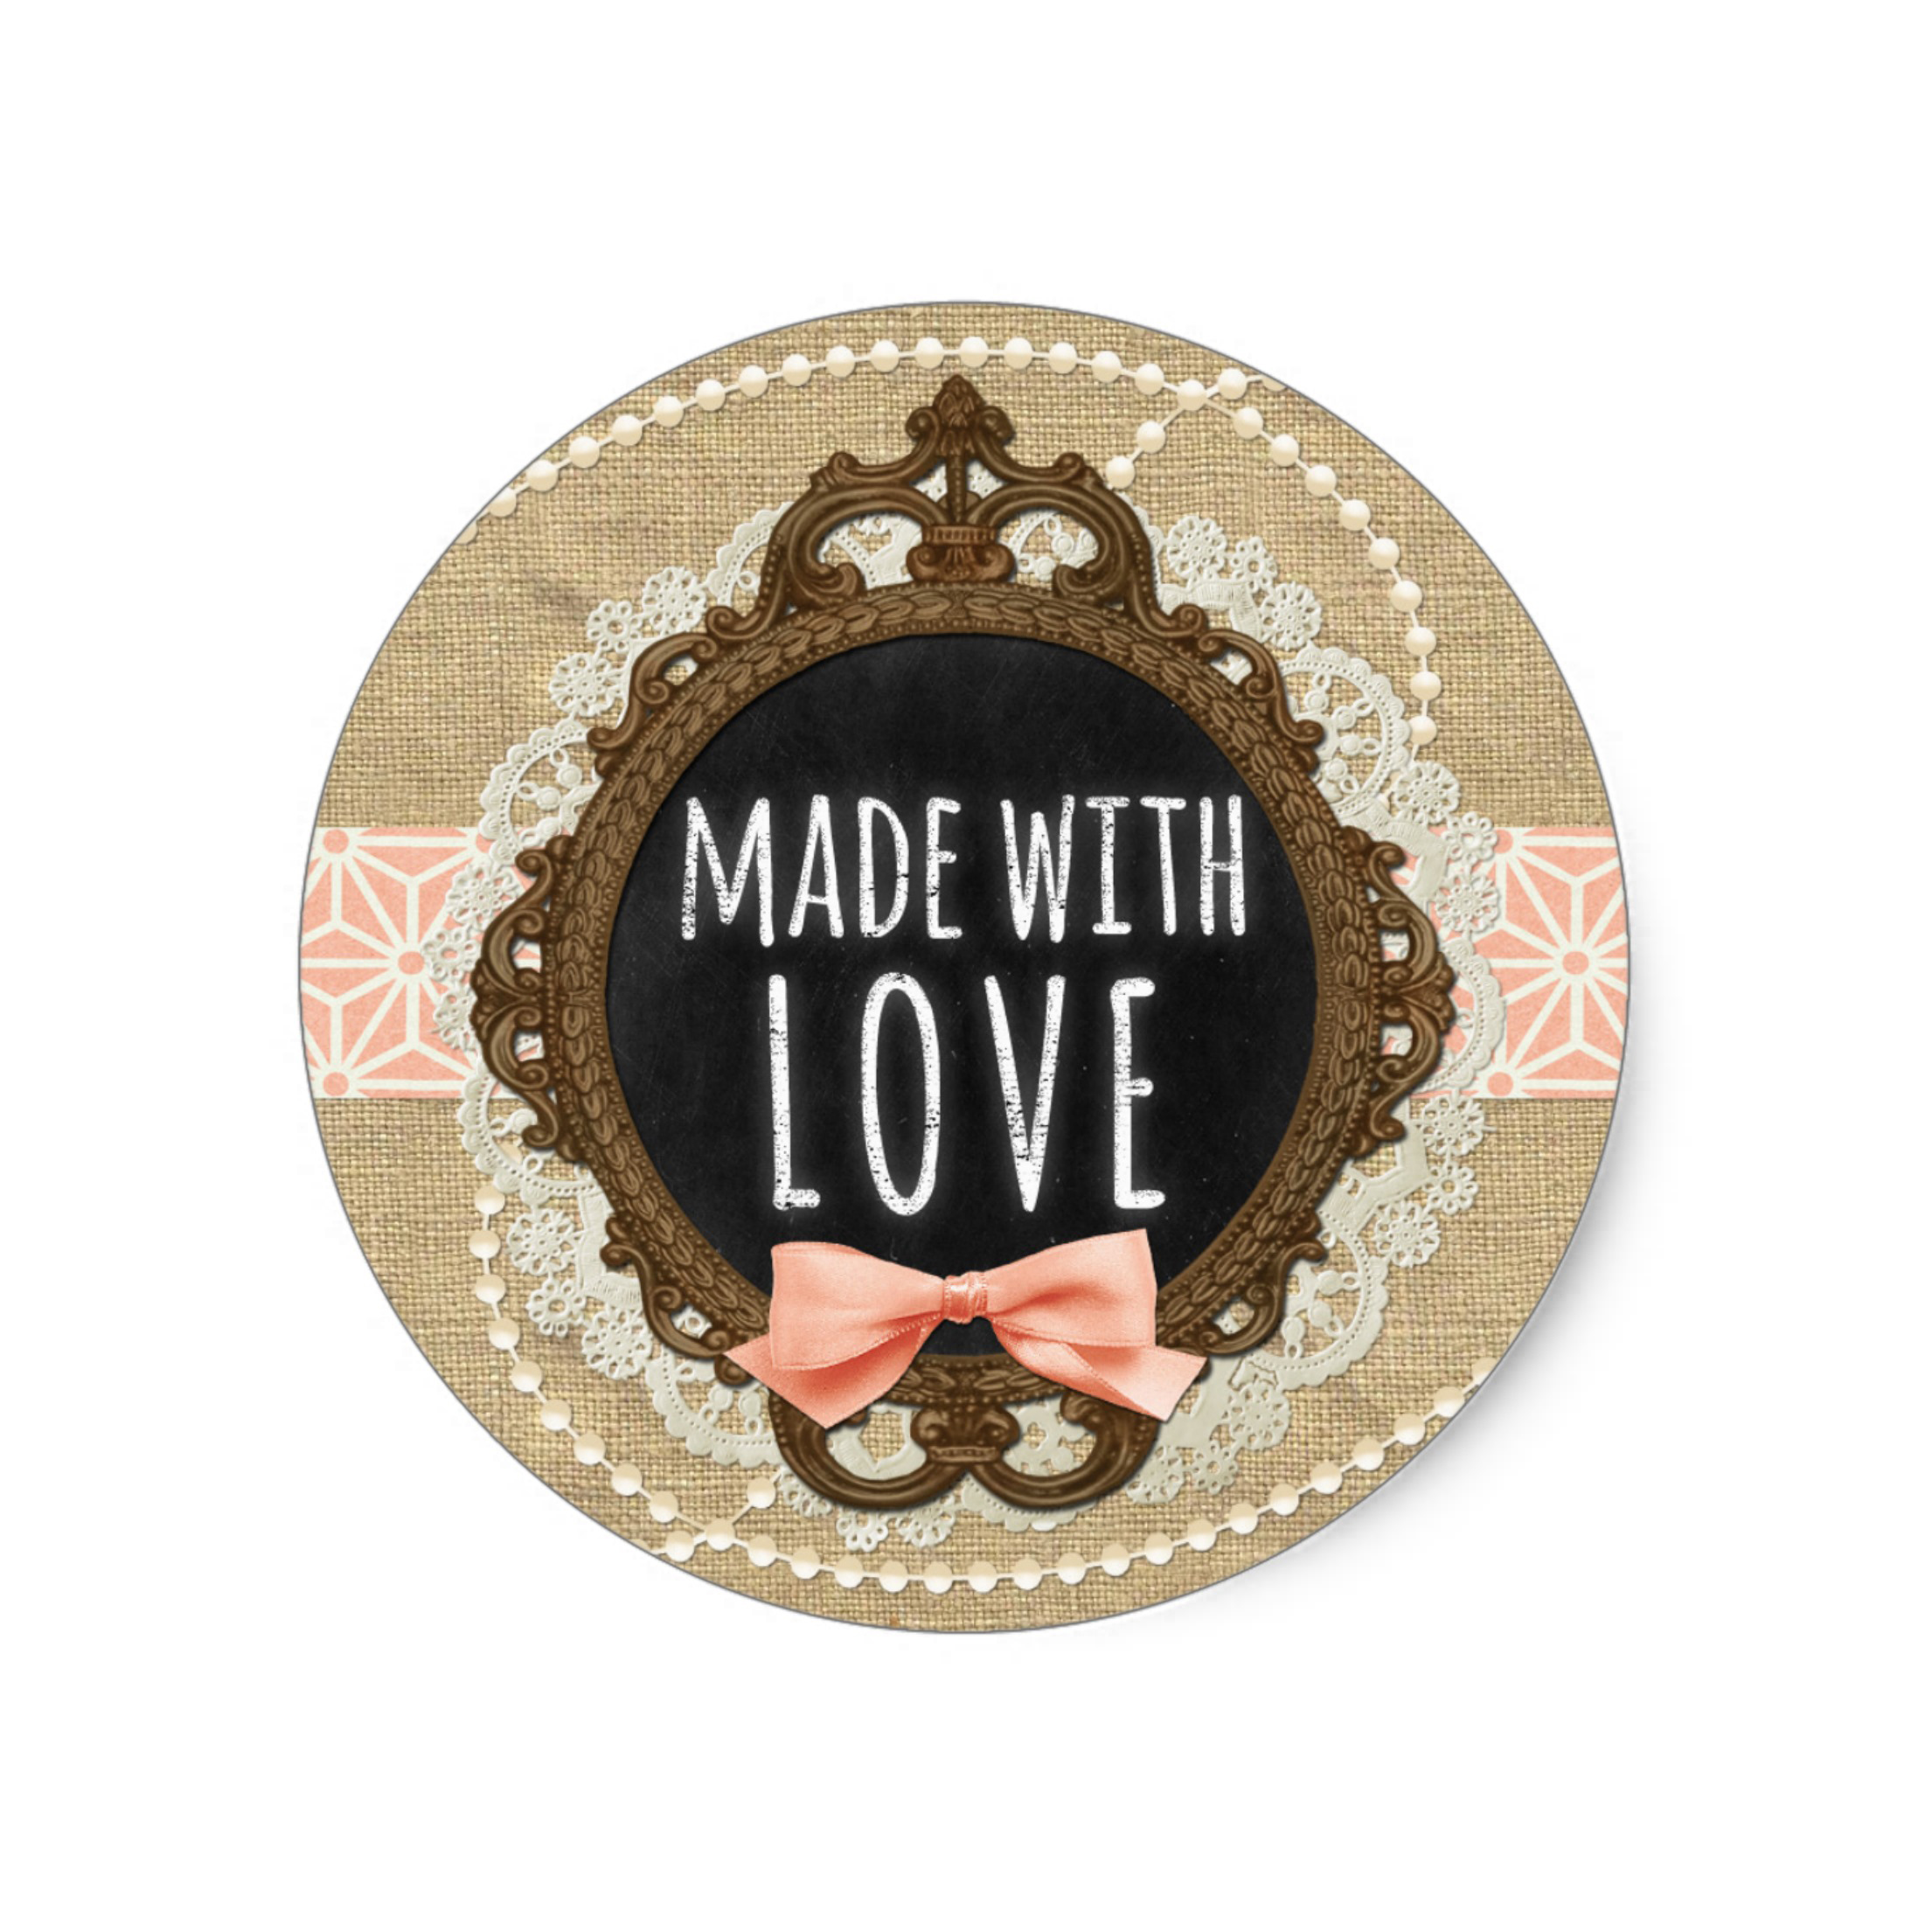 handmade_with_love_chalkboard_product_packaging_classic_round_sticker-redf74a37f3984e47bb2aba690f7c16cf_v9waf_8byvr_512